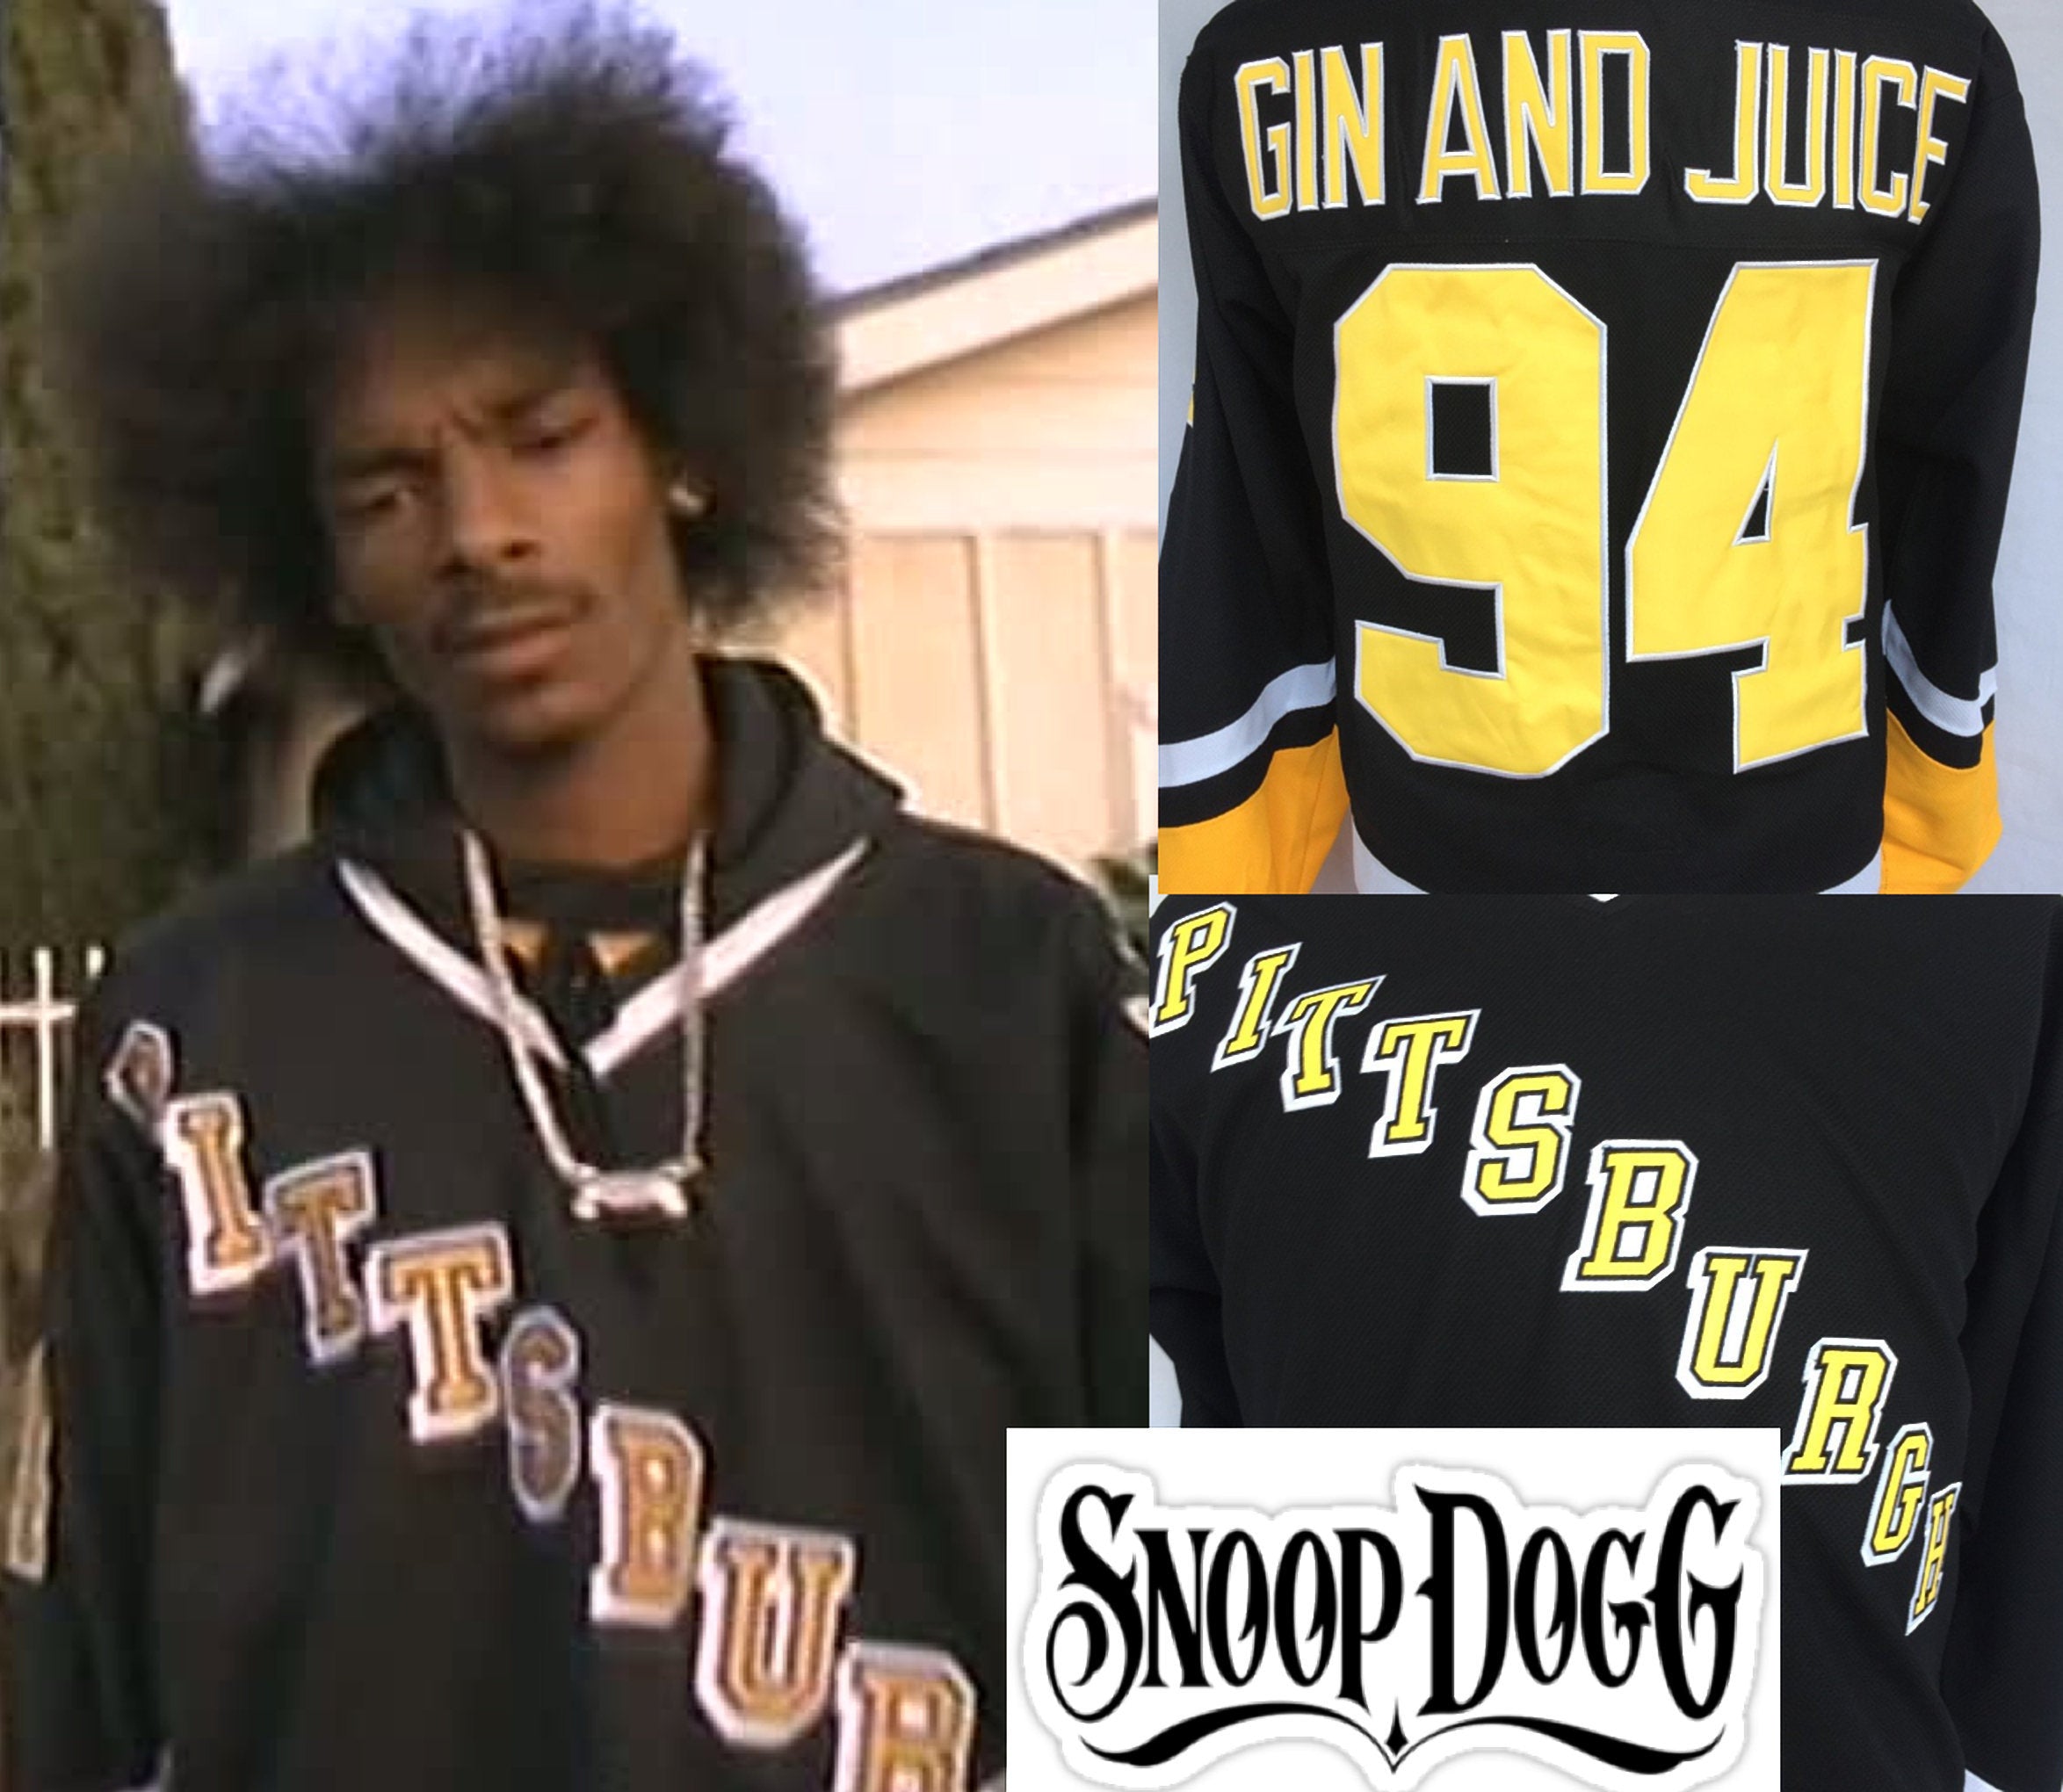  borizcustoms Snoop Compton LBC Stitch 94 Gin and Juice Hockey  Jersey : Clothing, Shoes & Jewelry